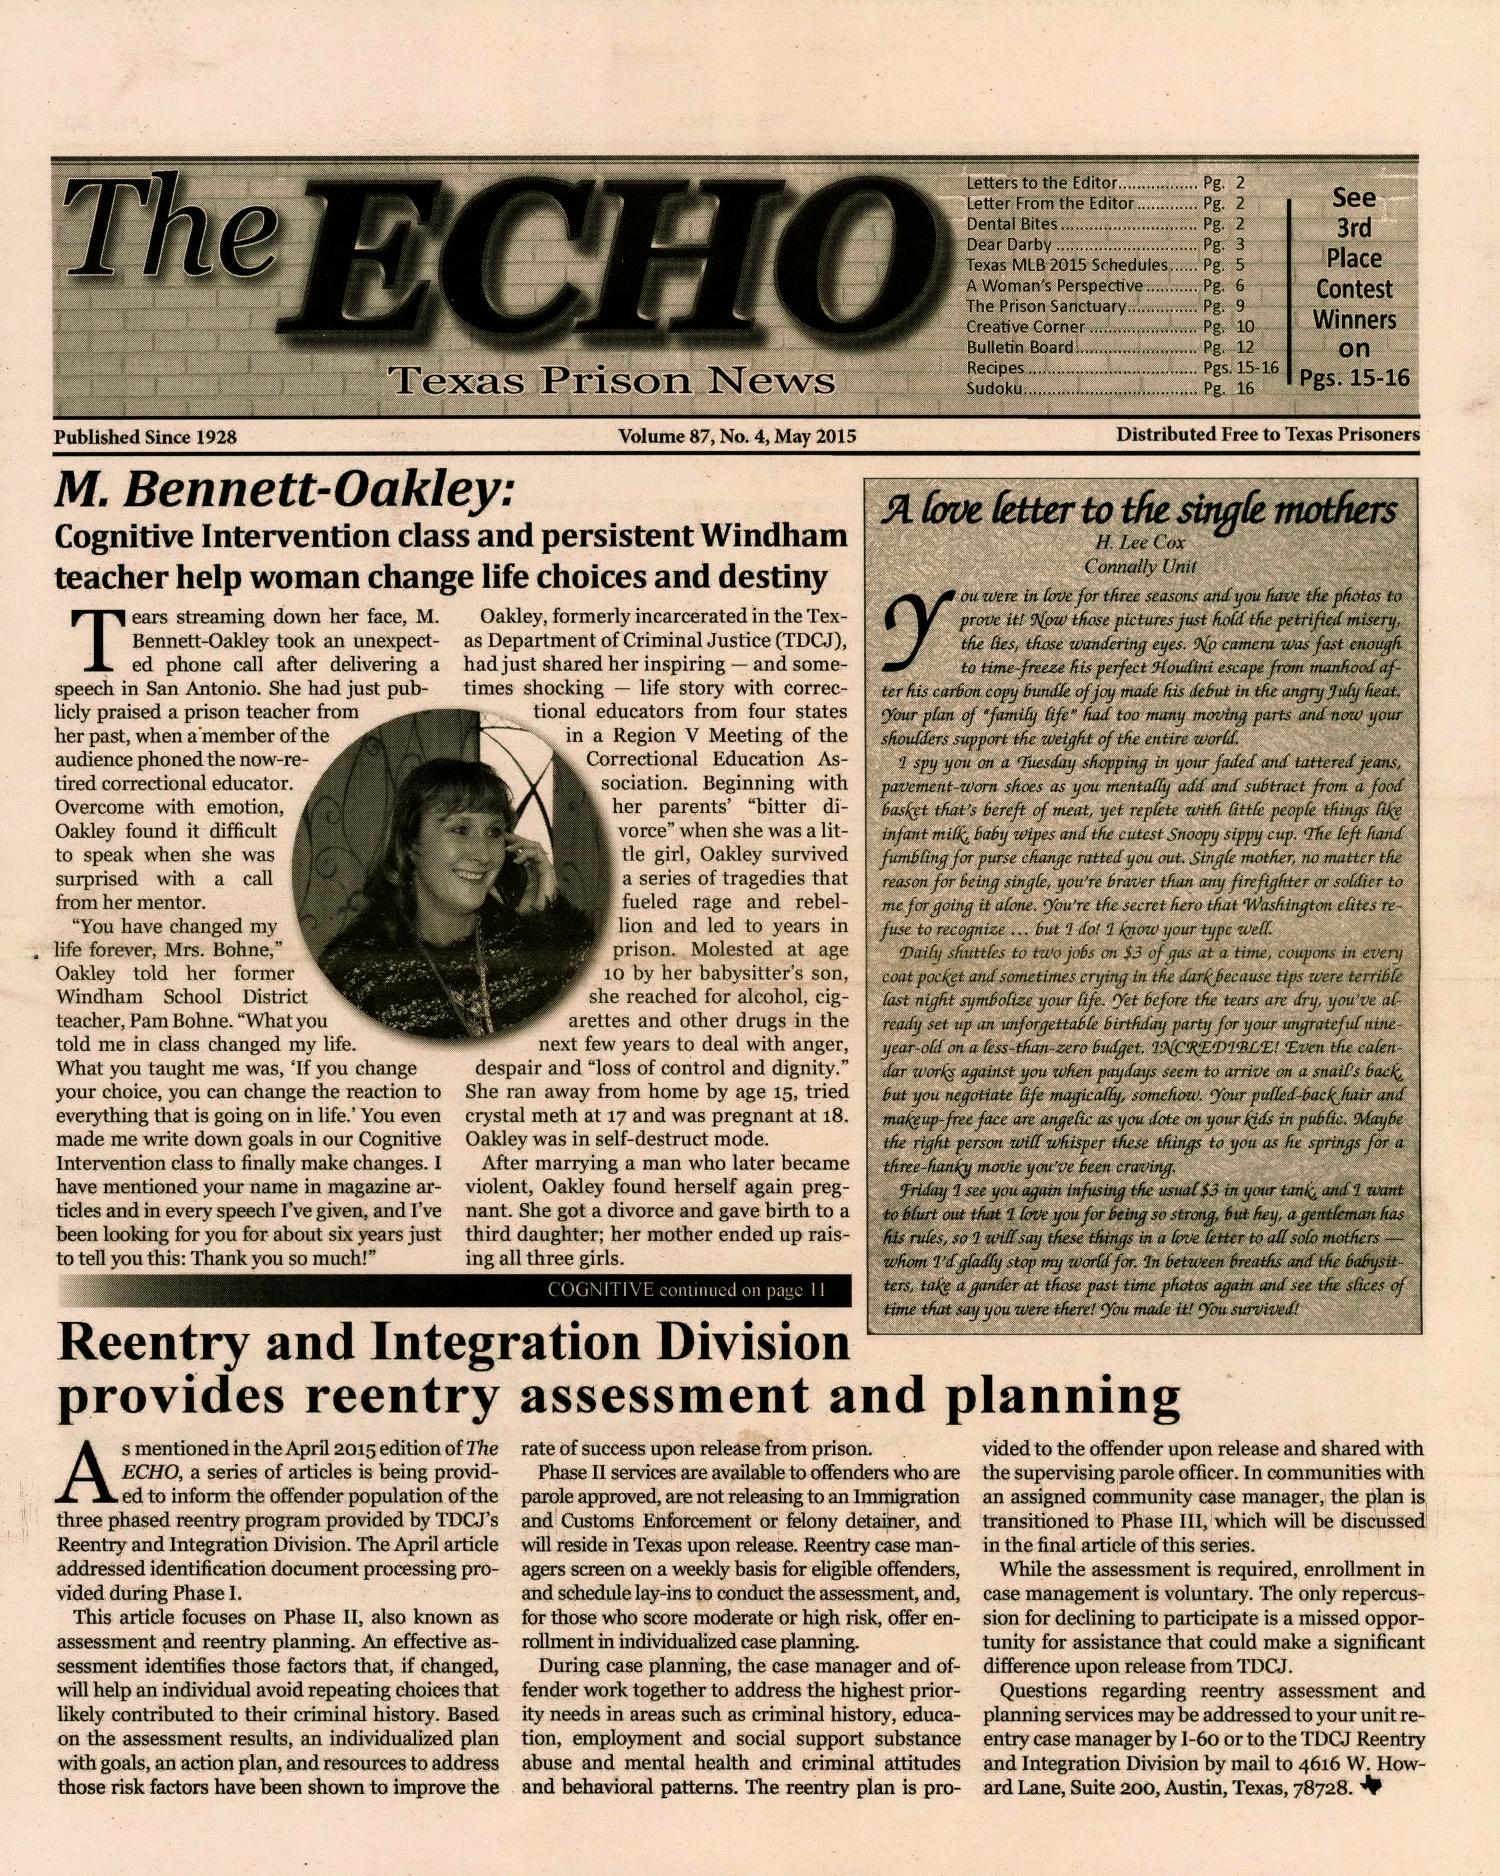 The ECHO, Volume 87, Number 4, May 2015
                                                
                                                    1
                                                